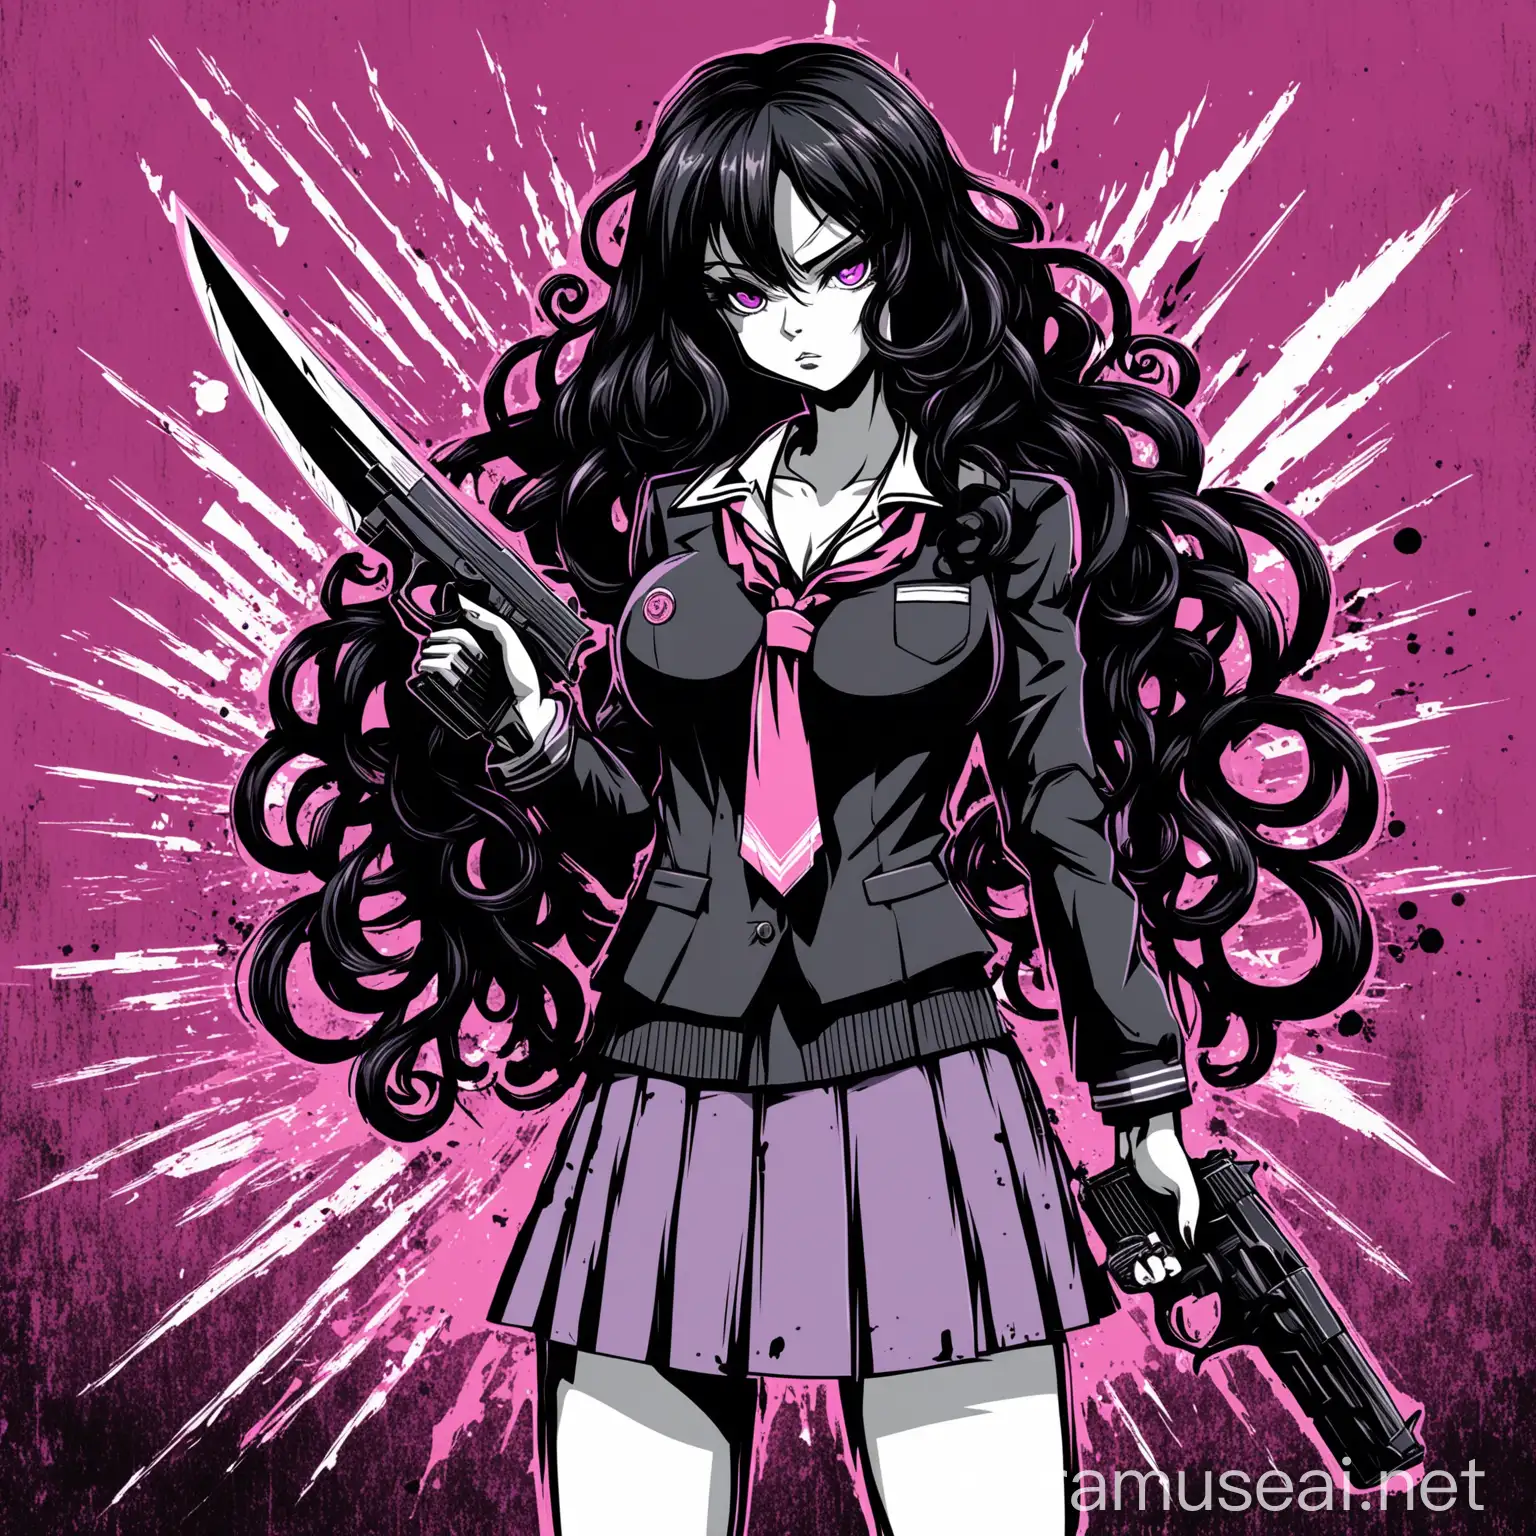 Design a sleek and edgy graphic featuring an female anime-style character with long black curly hair, bra, big boobs, school uniform, holding a handgun and a knife in a ready stance. The character should be highlighted with sharp, clean lines and a monochromatic color palette, with accents of pink and purple to draw attention to key details. Incorporate subtle grunge textures and abstract shapes in the background to give the design a modern, urban feel."

